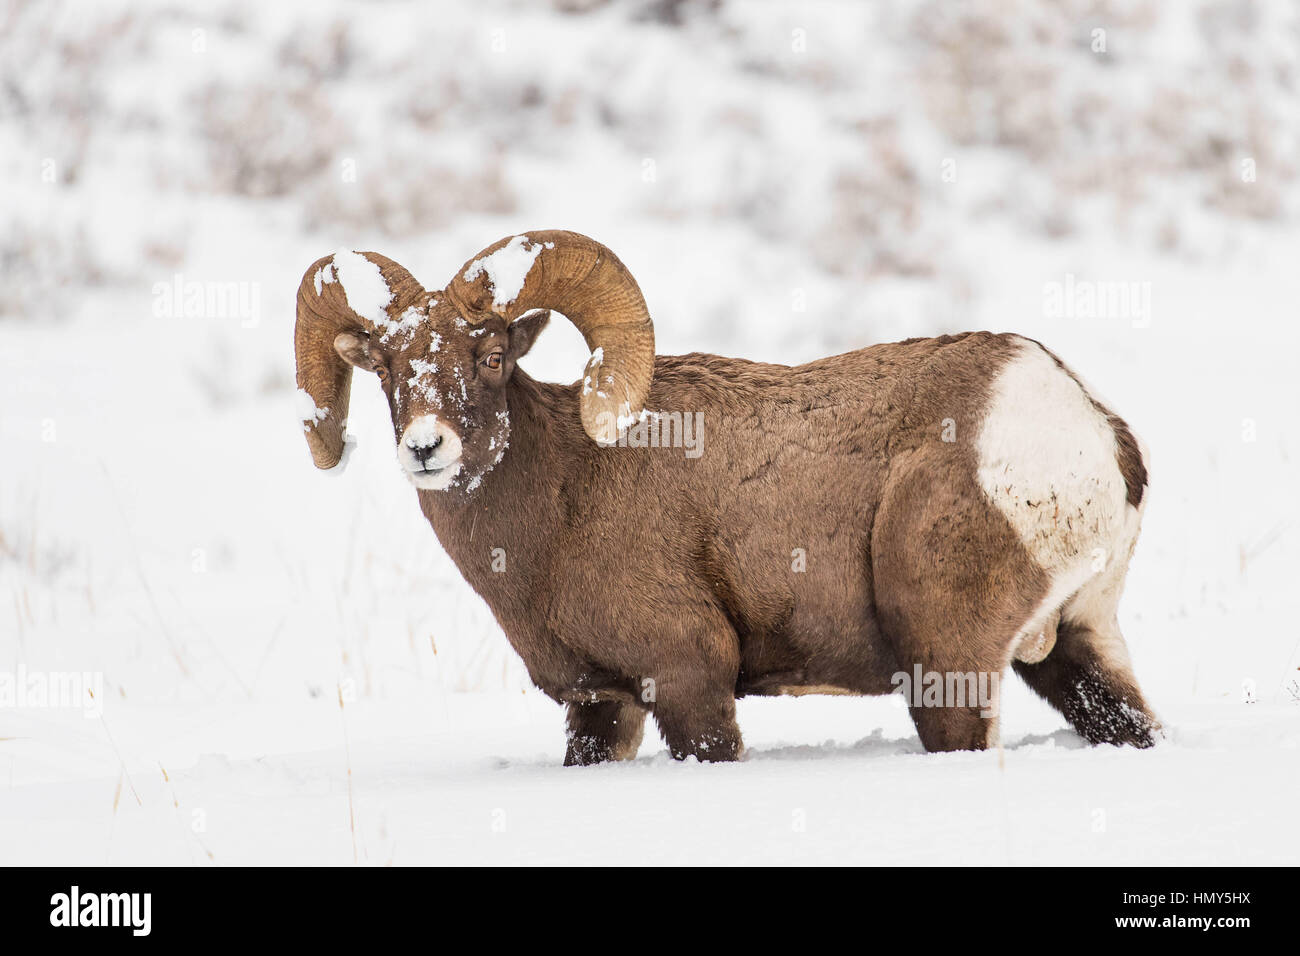 Ram, Male BigHorn Sheep (Ovis Canadensis) in winter snow in Lamar Valley, Yellowstone National Park, Wyoming, USA Stock Photo